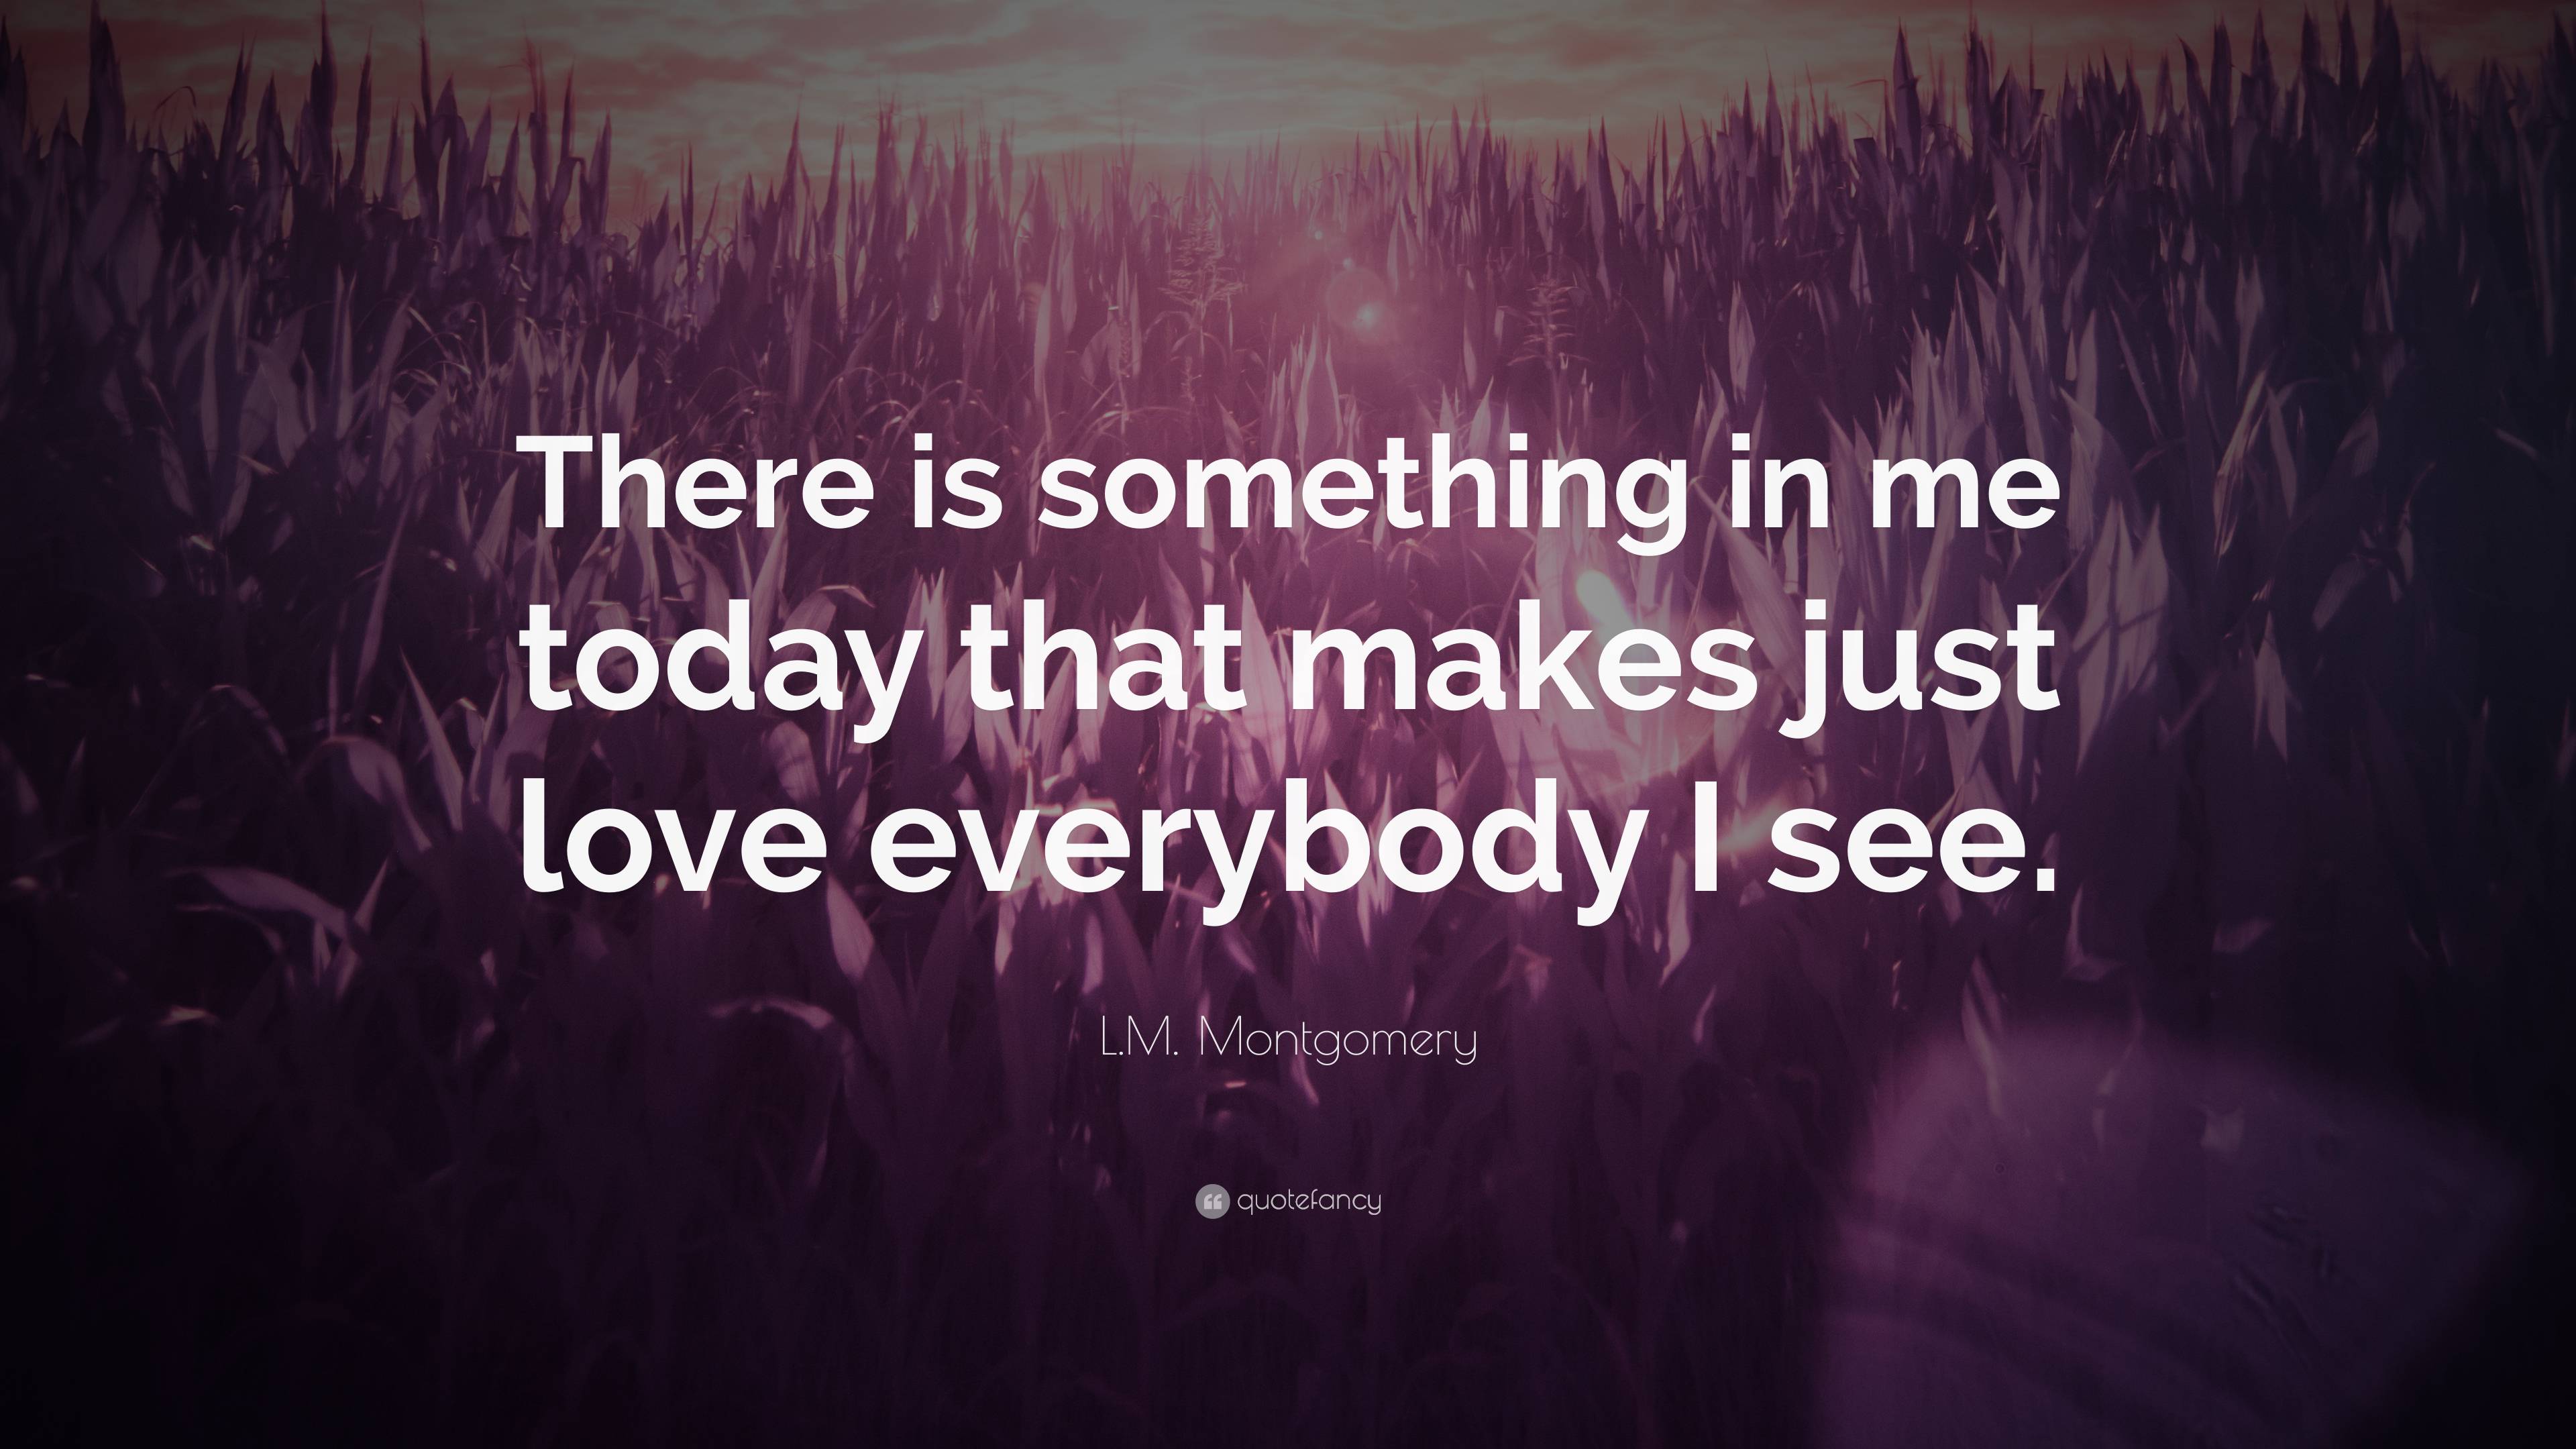 L.M. Montgomery Quote: “There is something in me today that makes just ...